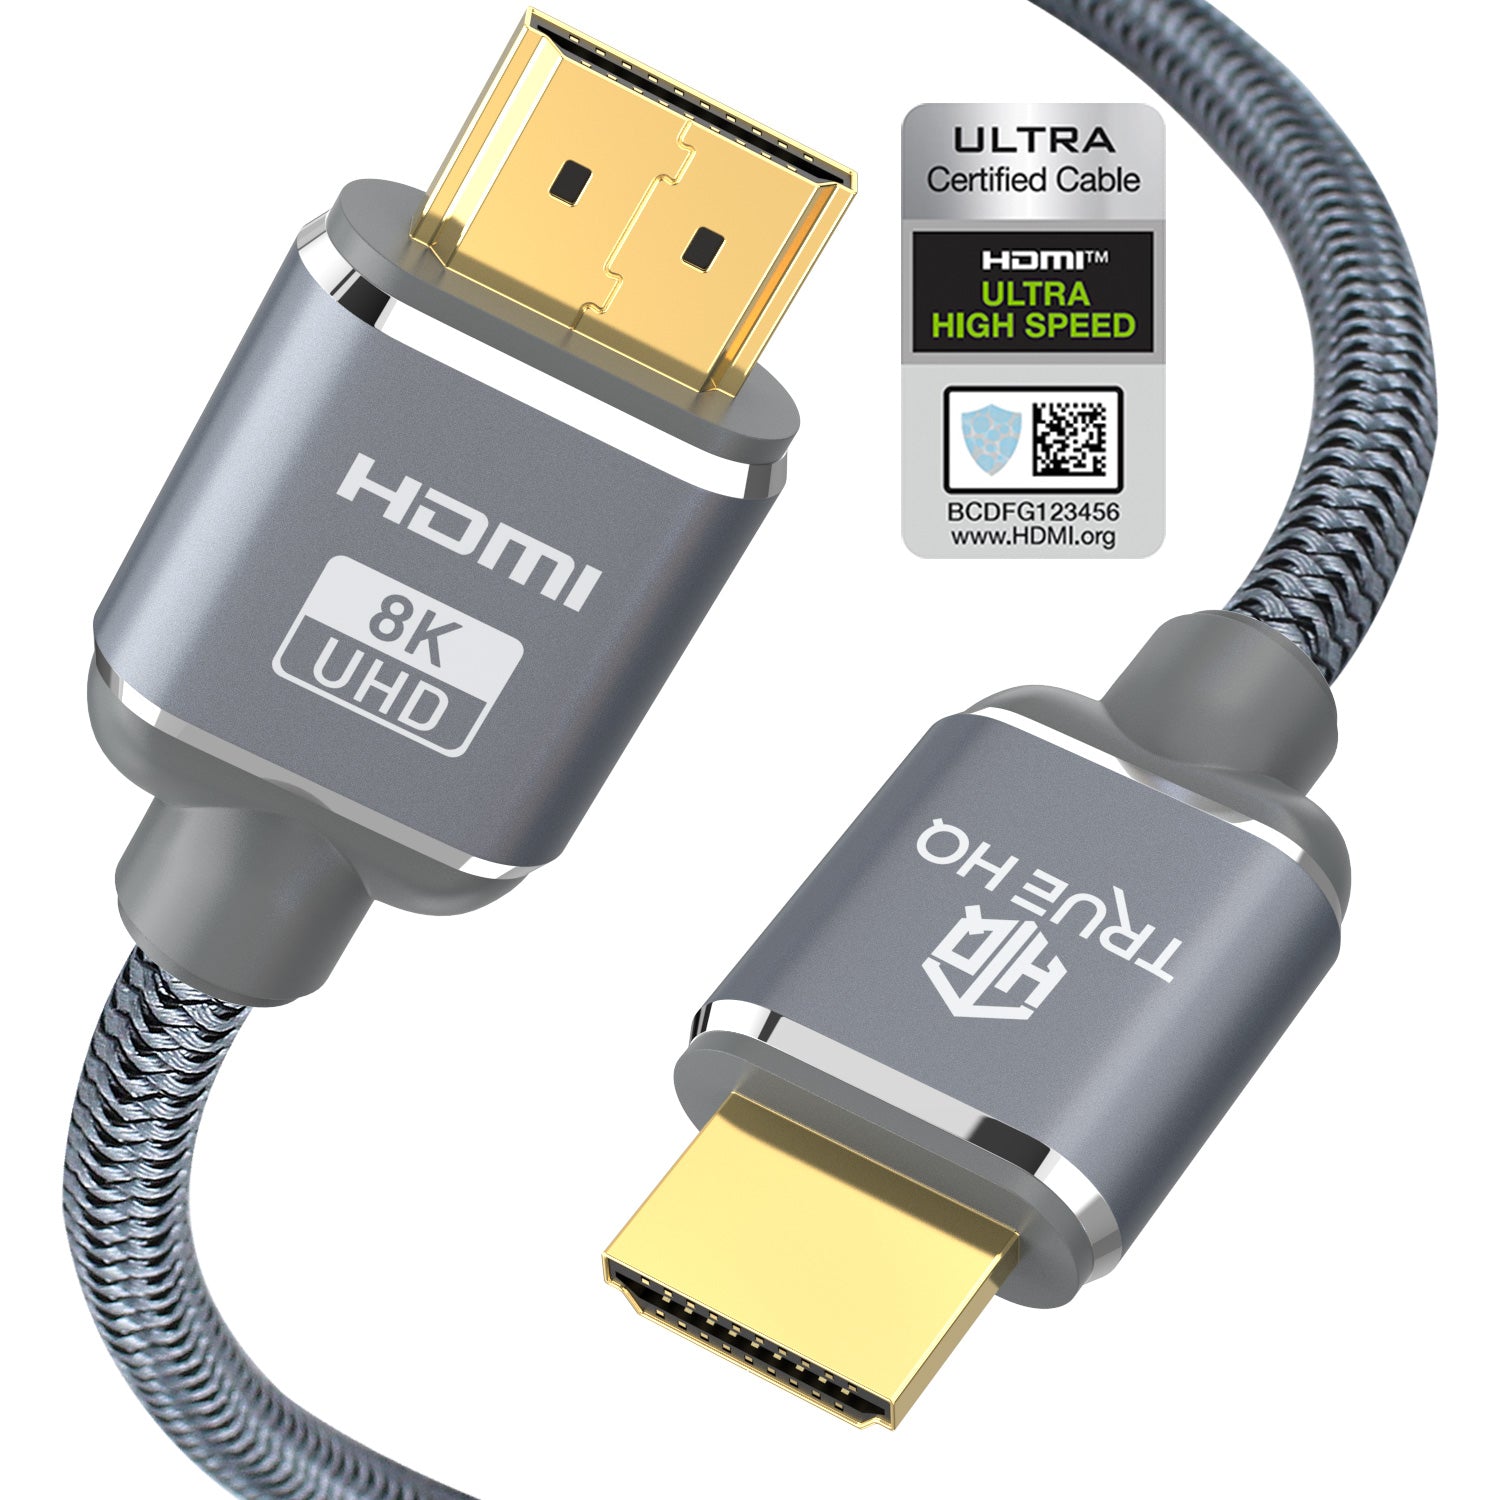 Ultra High Speed 8K HDMI 2.1 Cable for PlayStation®5